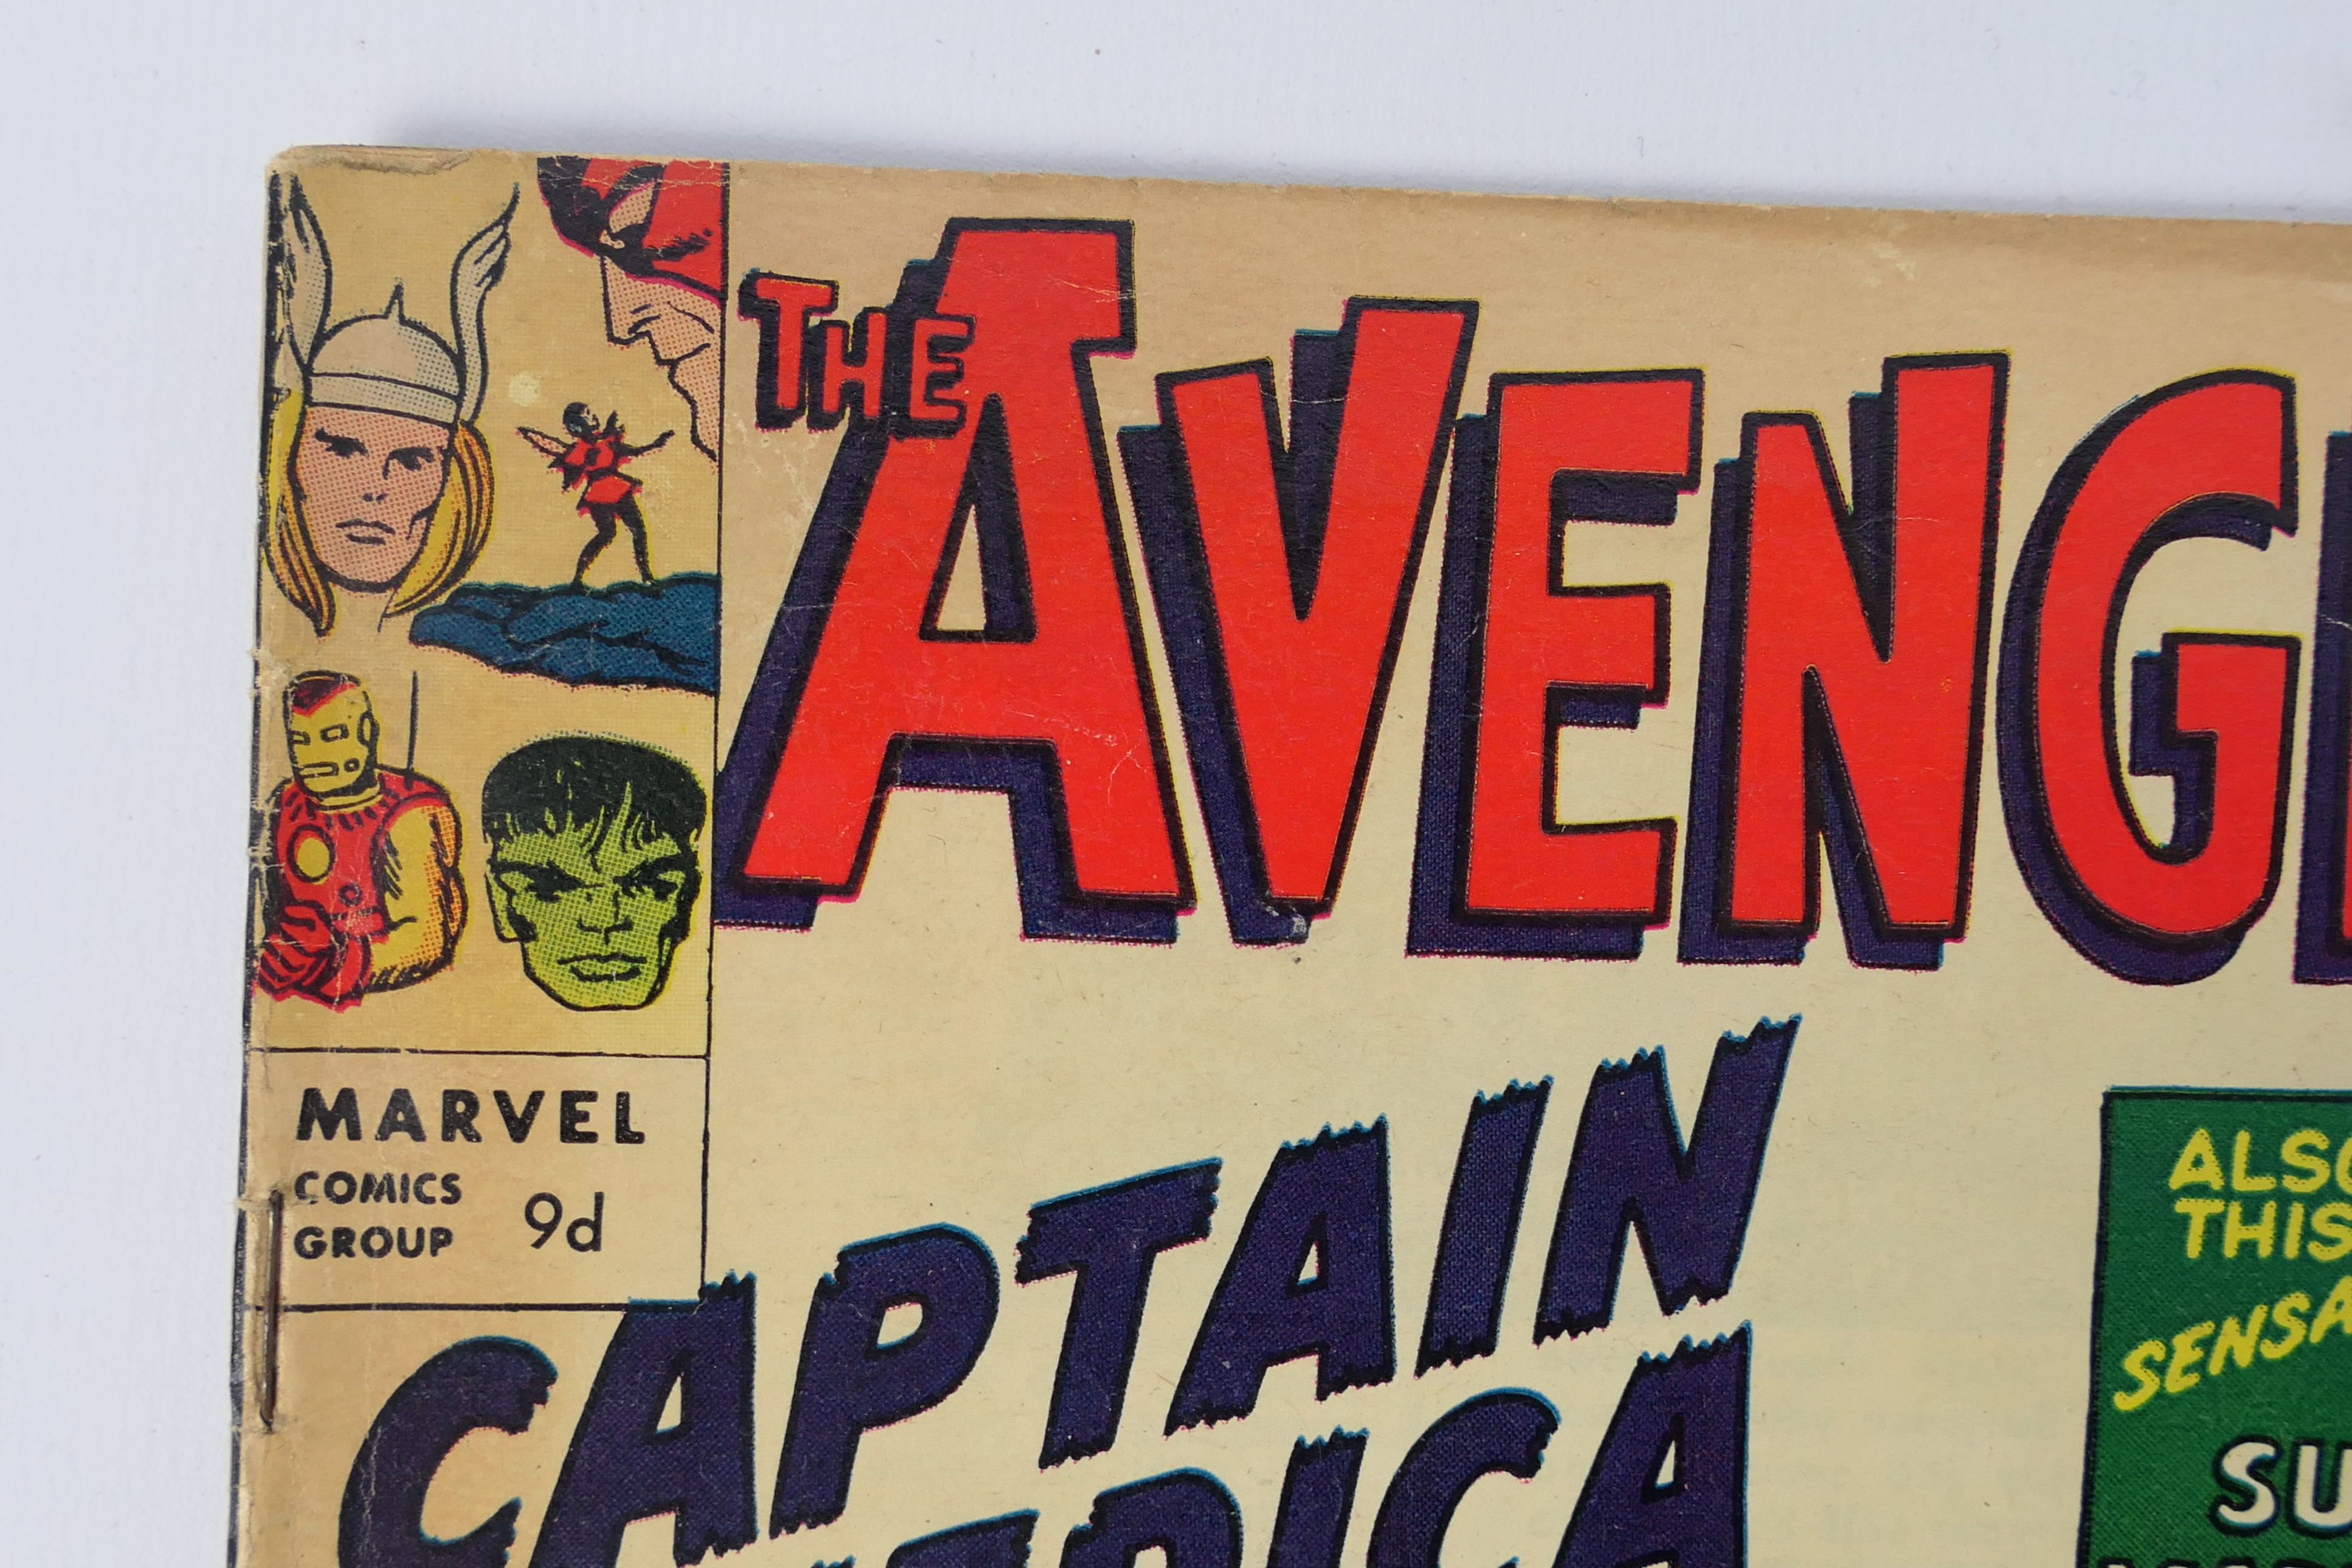 Marvel - The Avengers #4 March 1964 "Captain America Lives Again". - Image 2 of 12